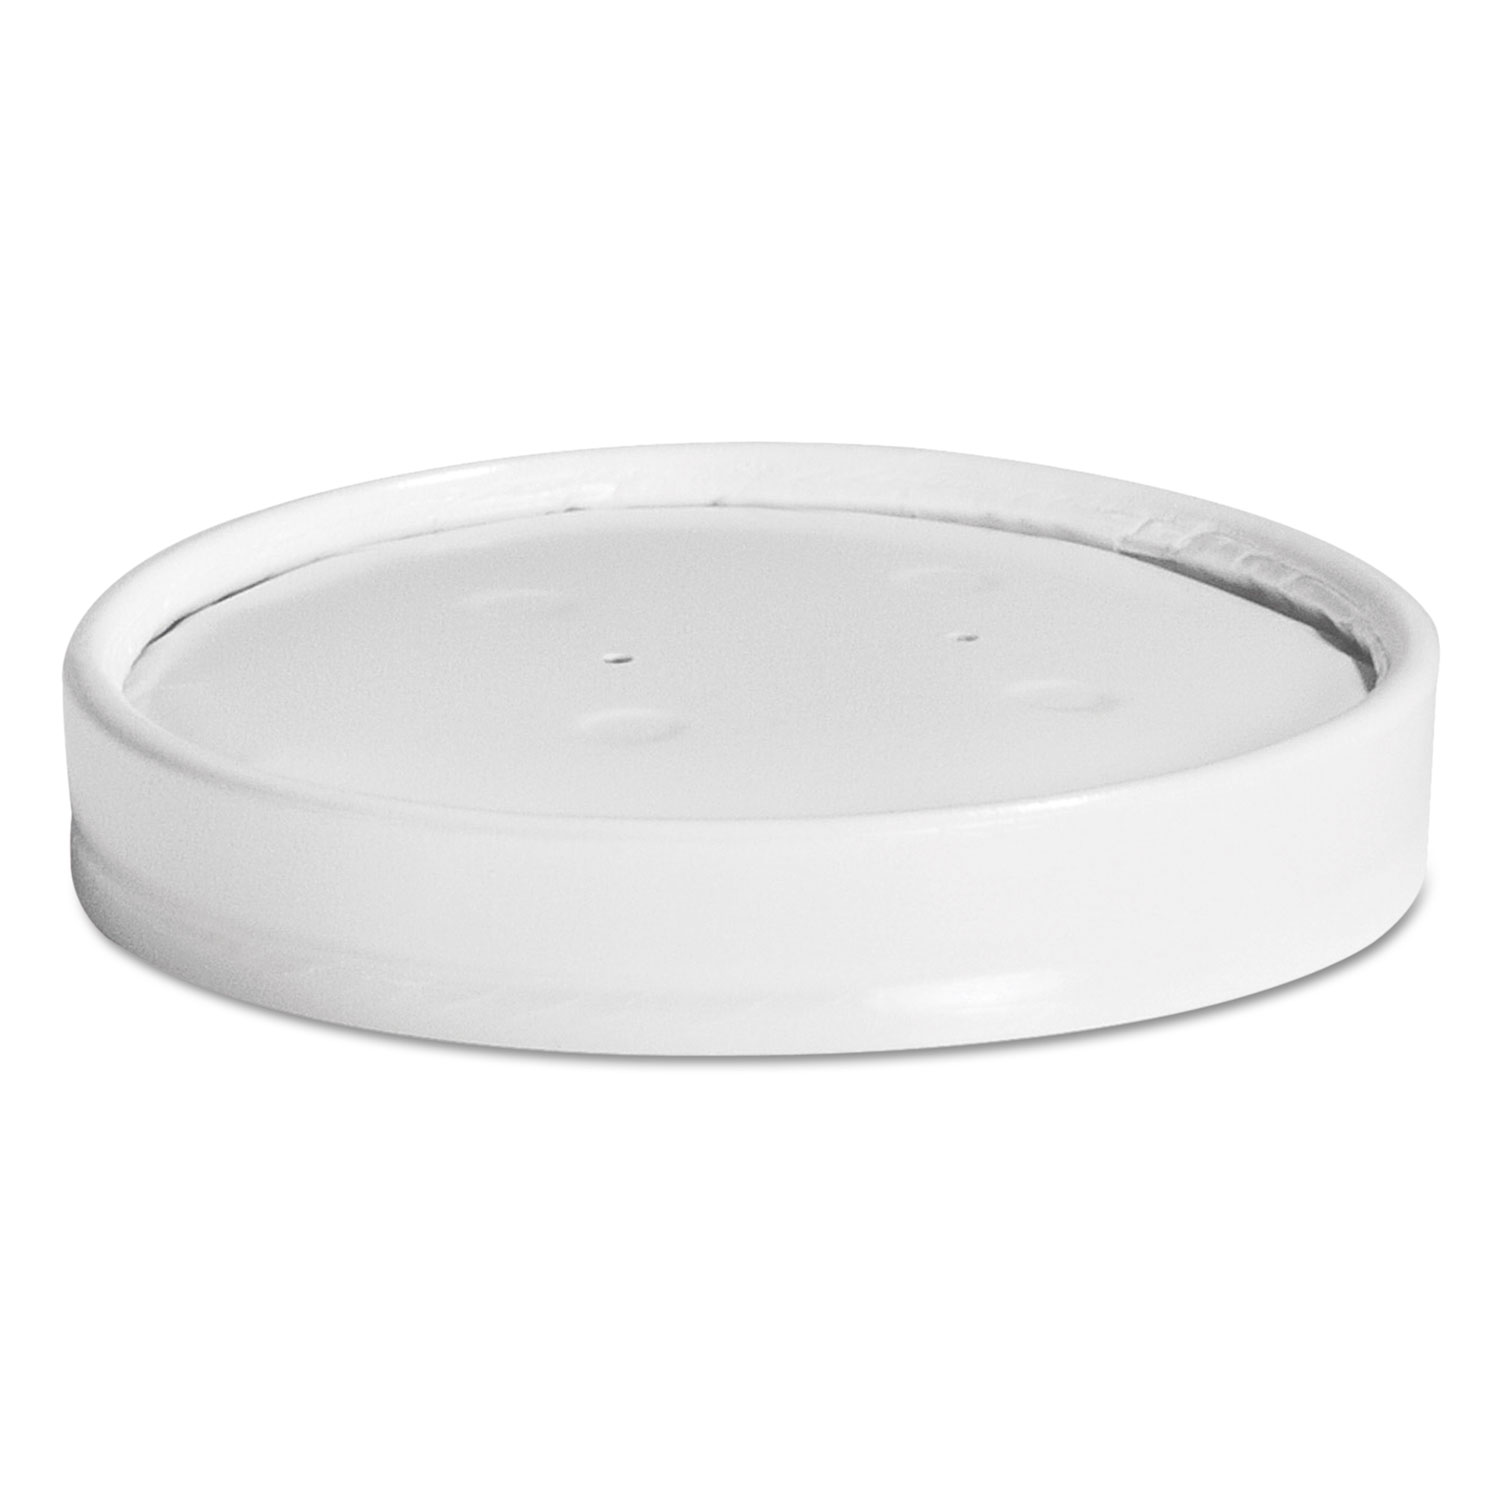  Chinet 71870 Vented Paper Lids, 8-16oz Cups, White, 25/Sleeve, 40 Sleeves/Carton (HUH71870) 